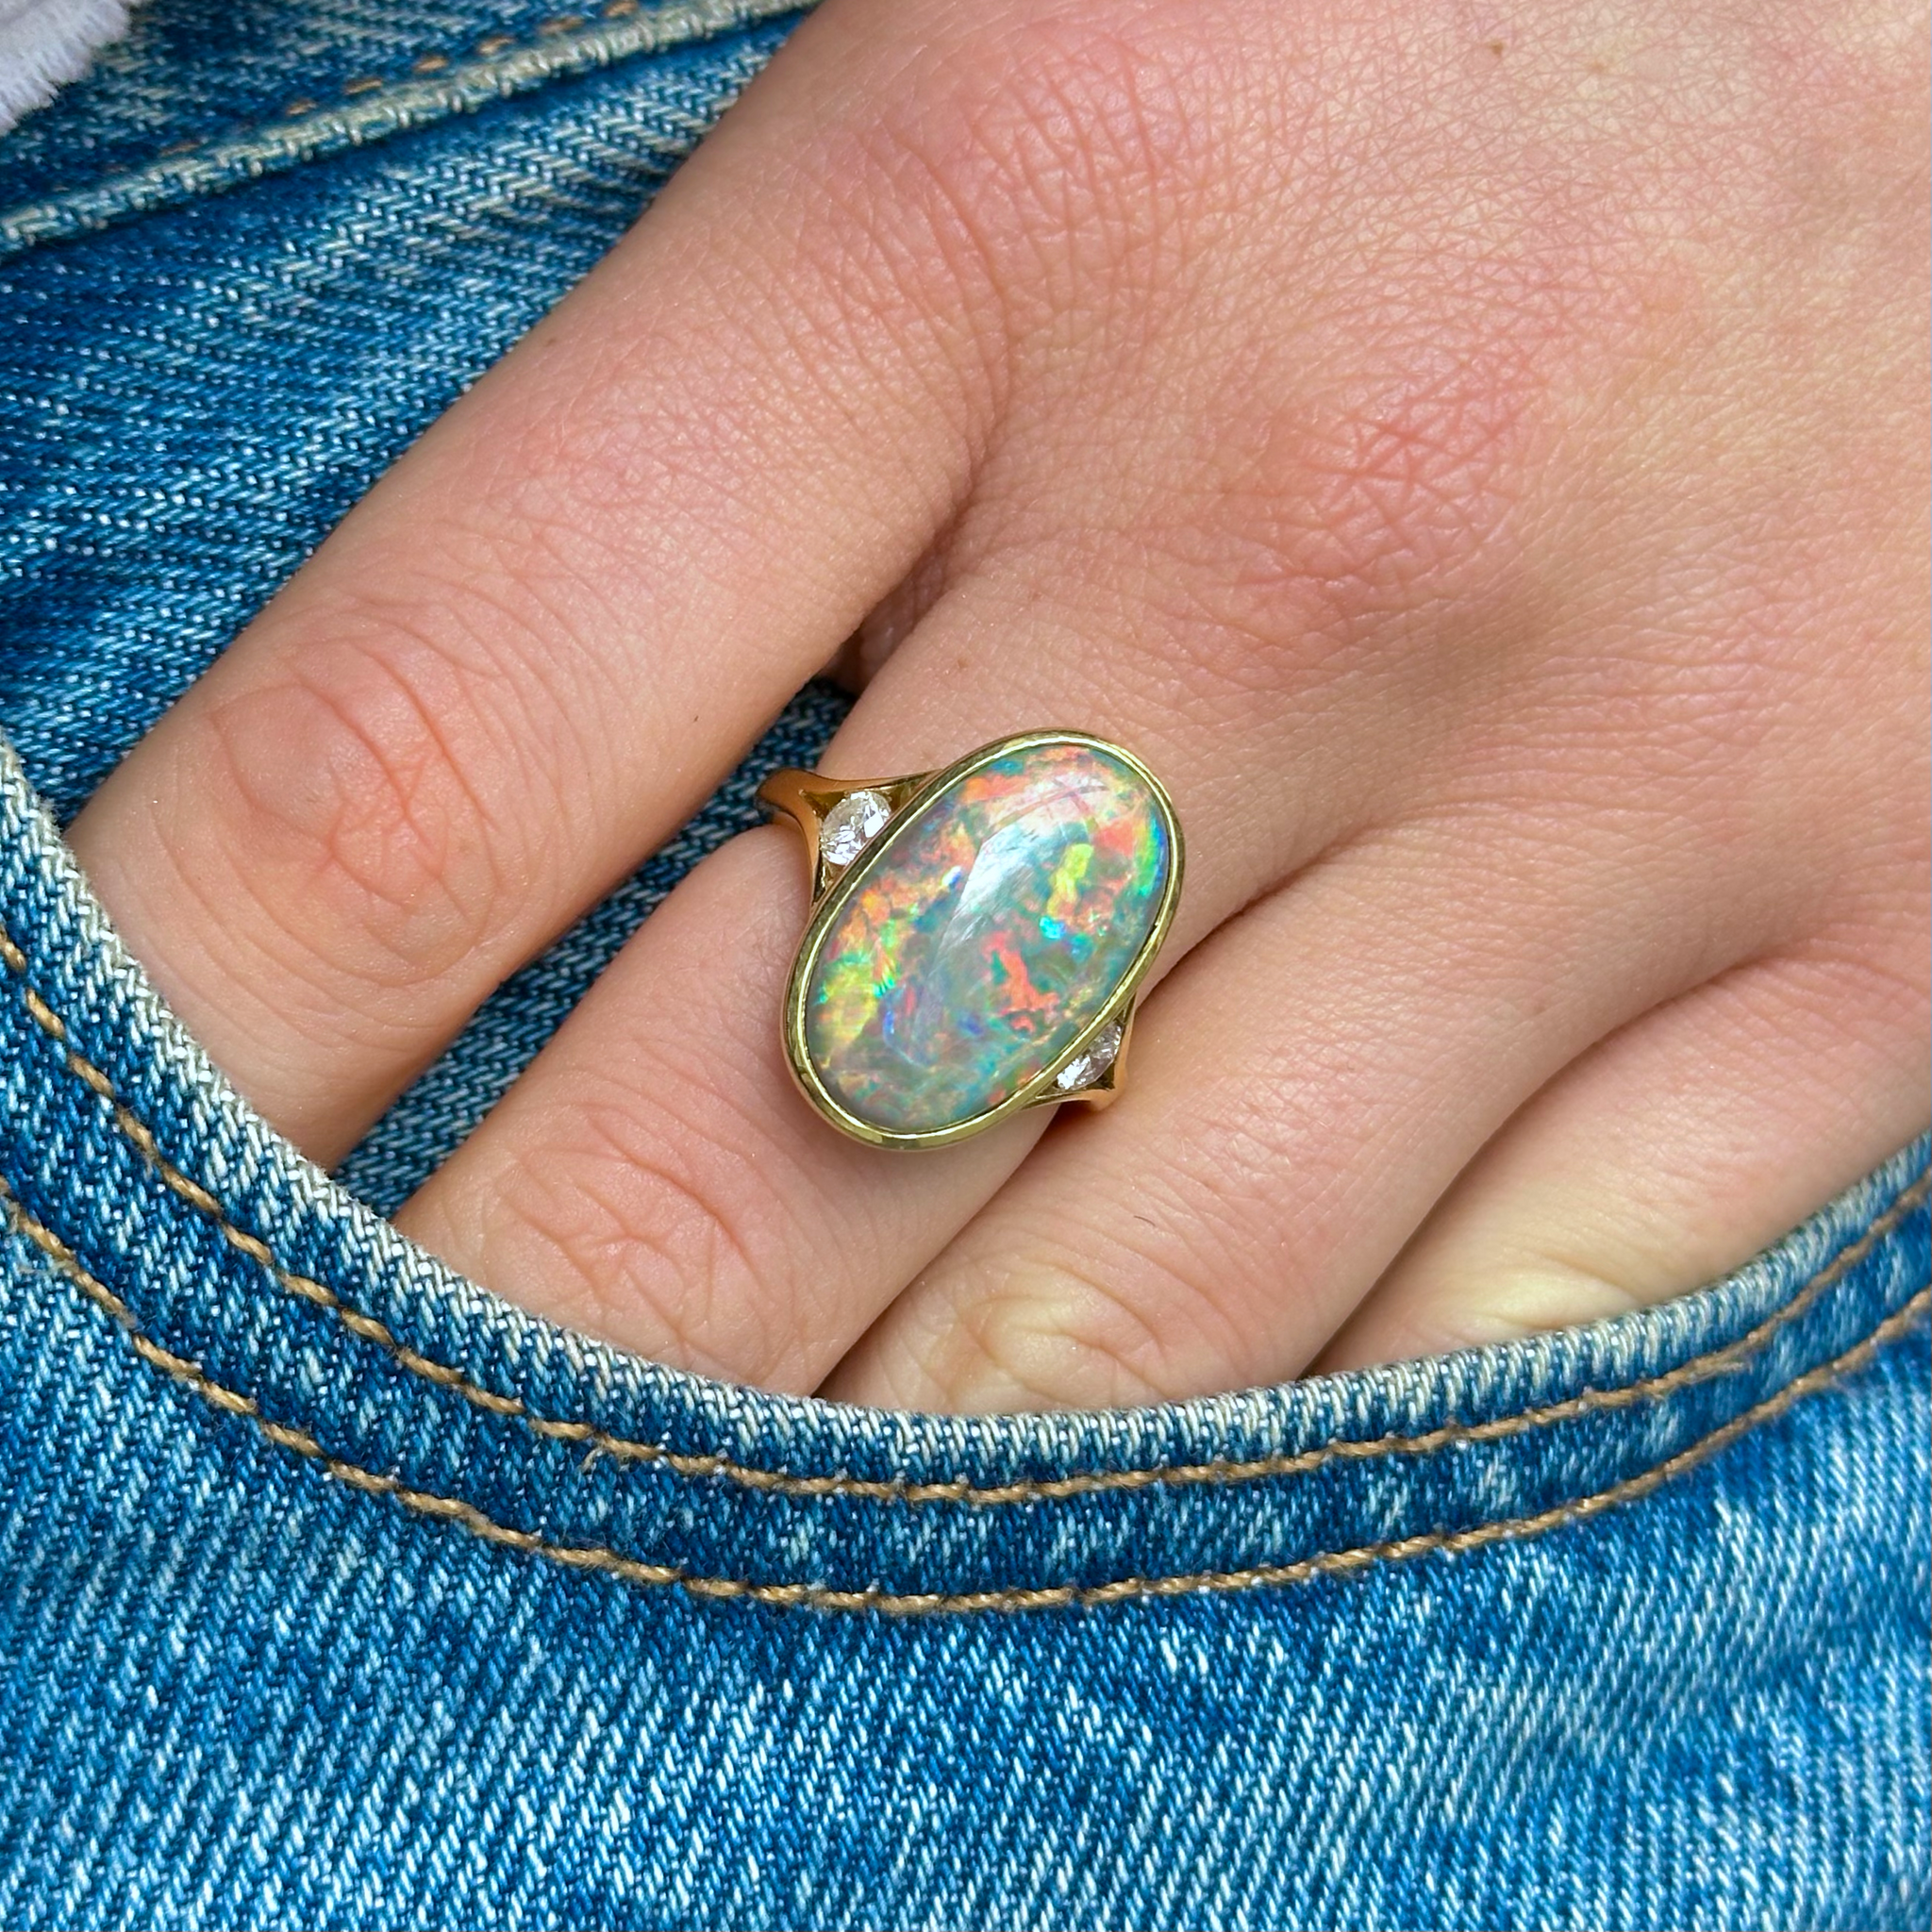 Contemporary, Black Opal and Diamond Cocktail Ring, worn on hand in pocket of jeans